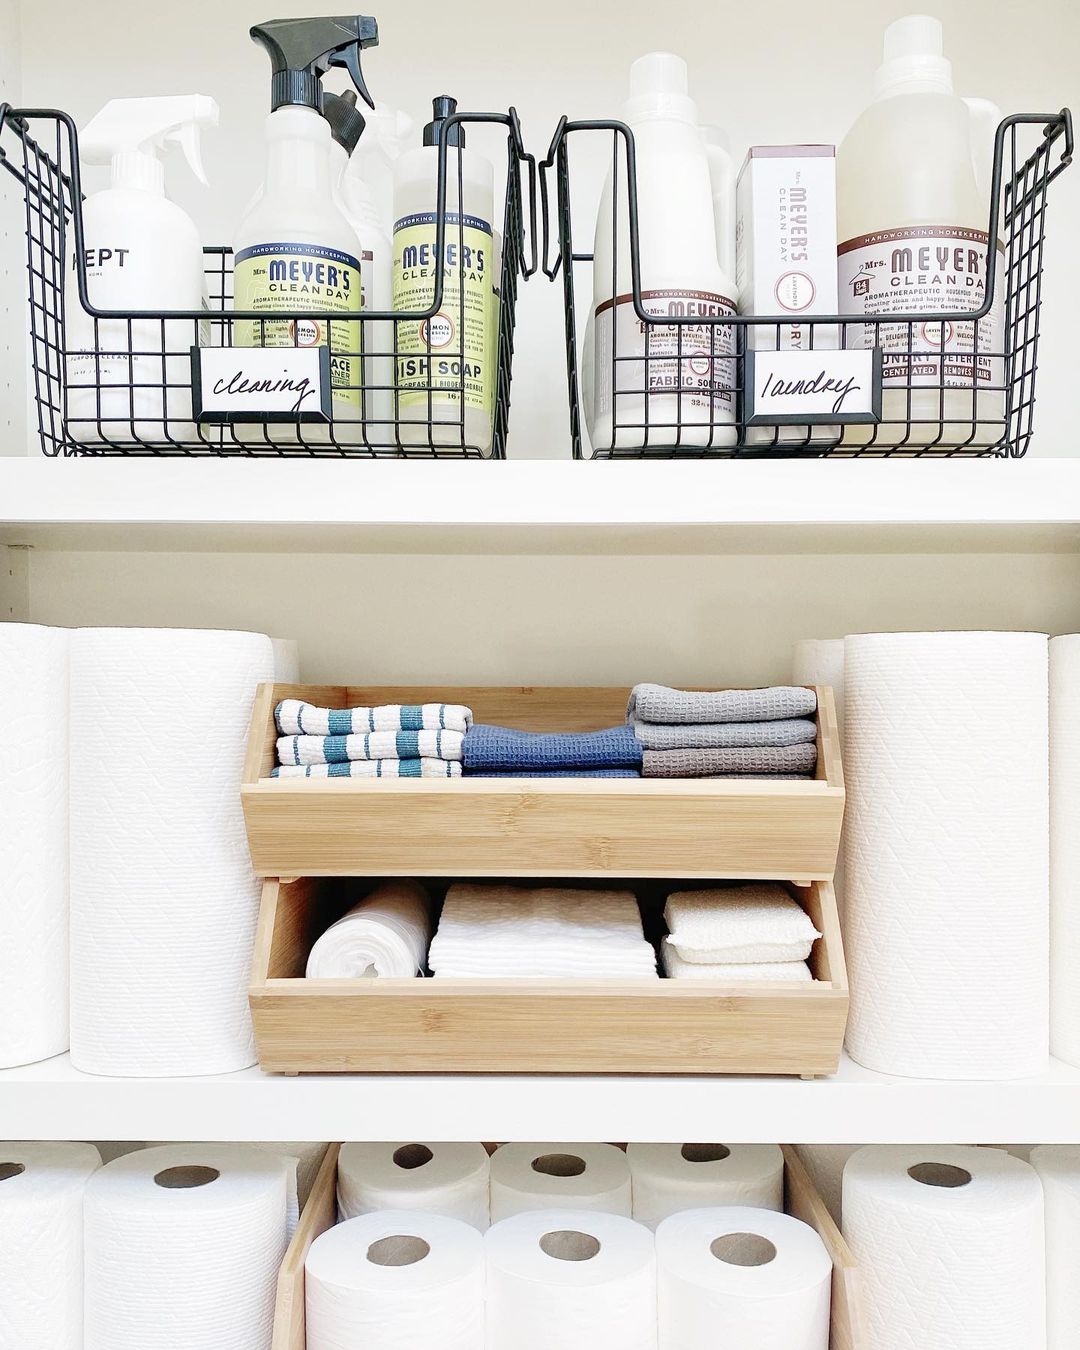 15 Photos of Perfectly Organized Spaces That Will Soothe Your Scattered Brain